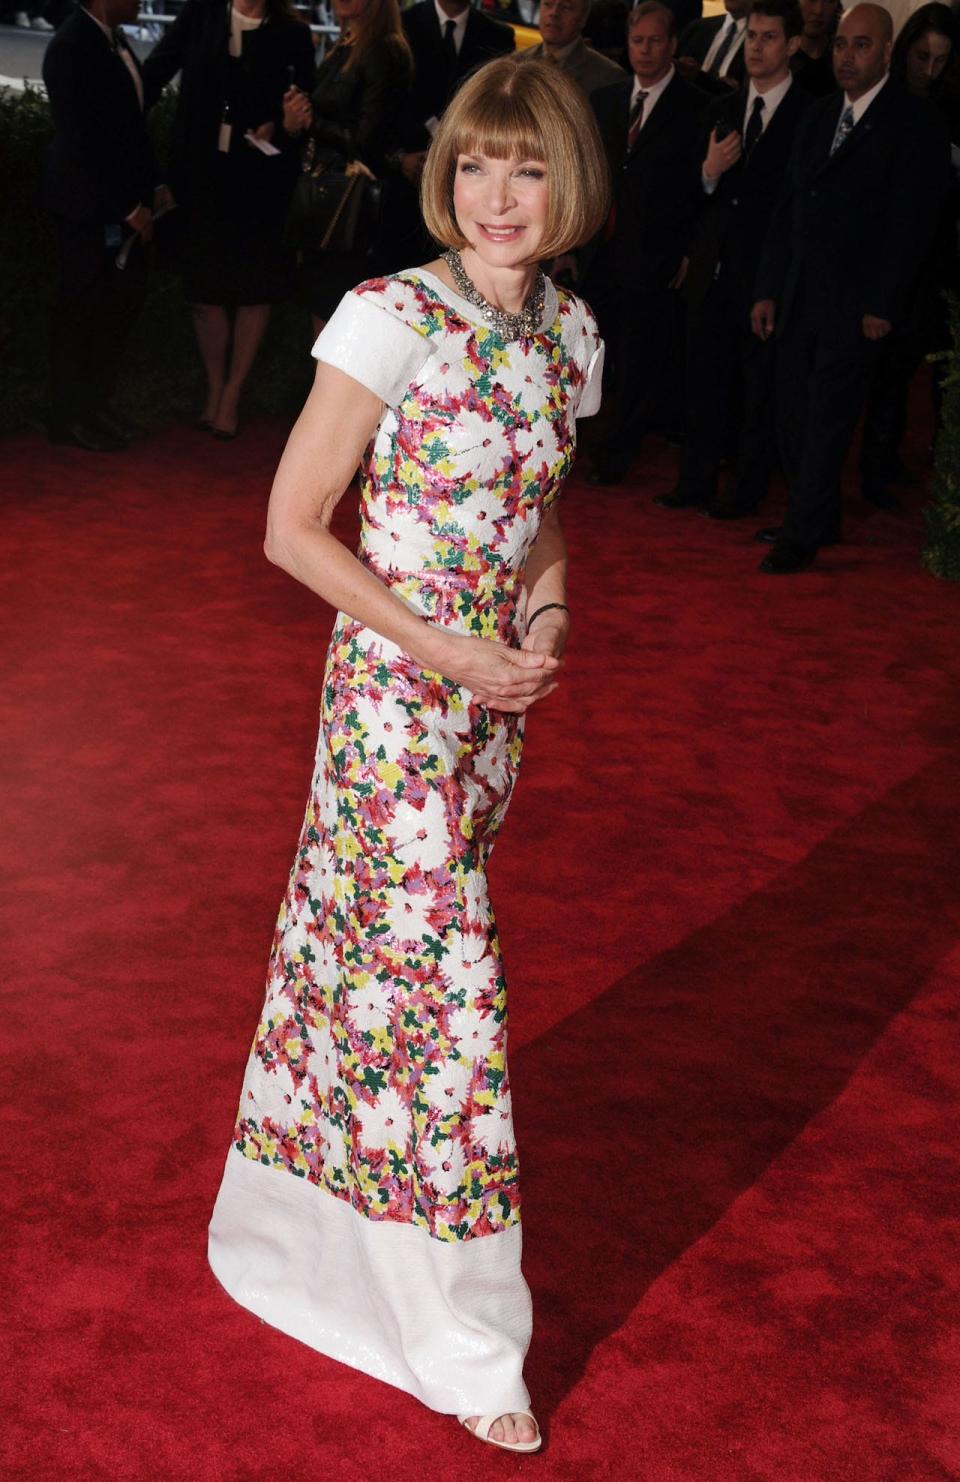 Anna Wintour at the 2013 Met Gala.